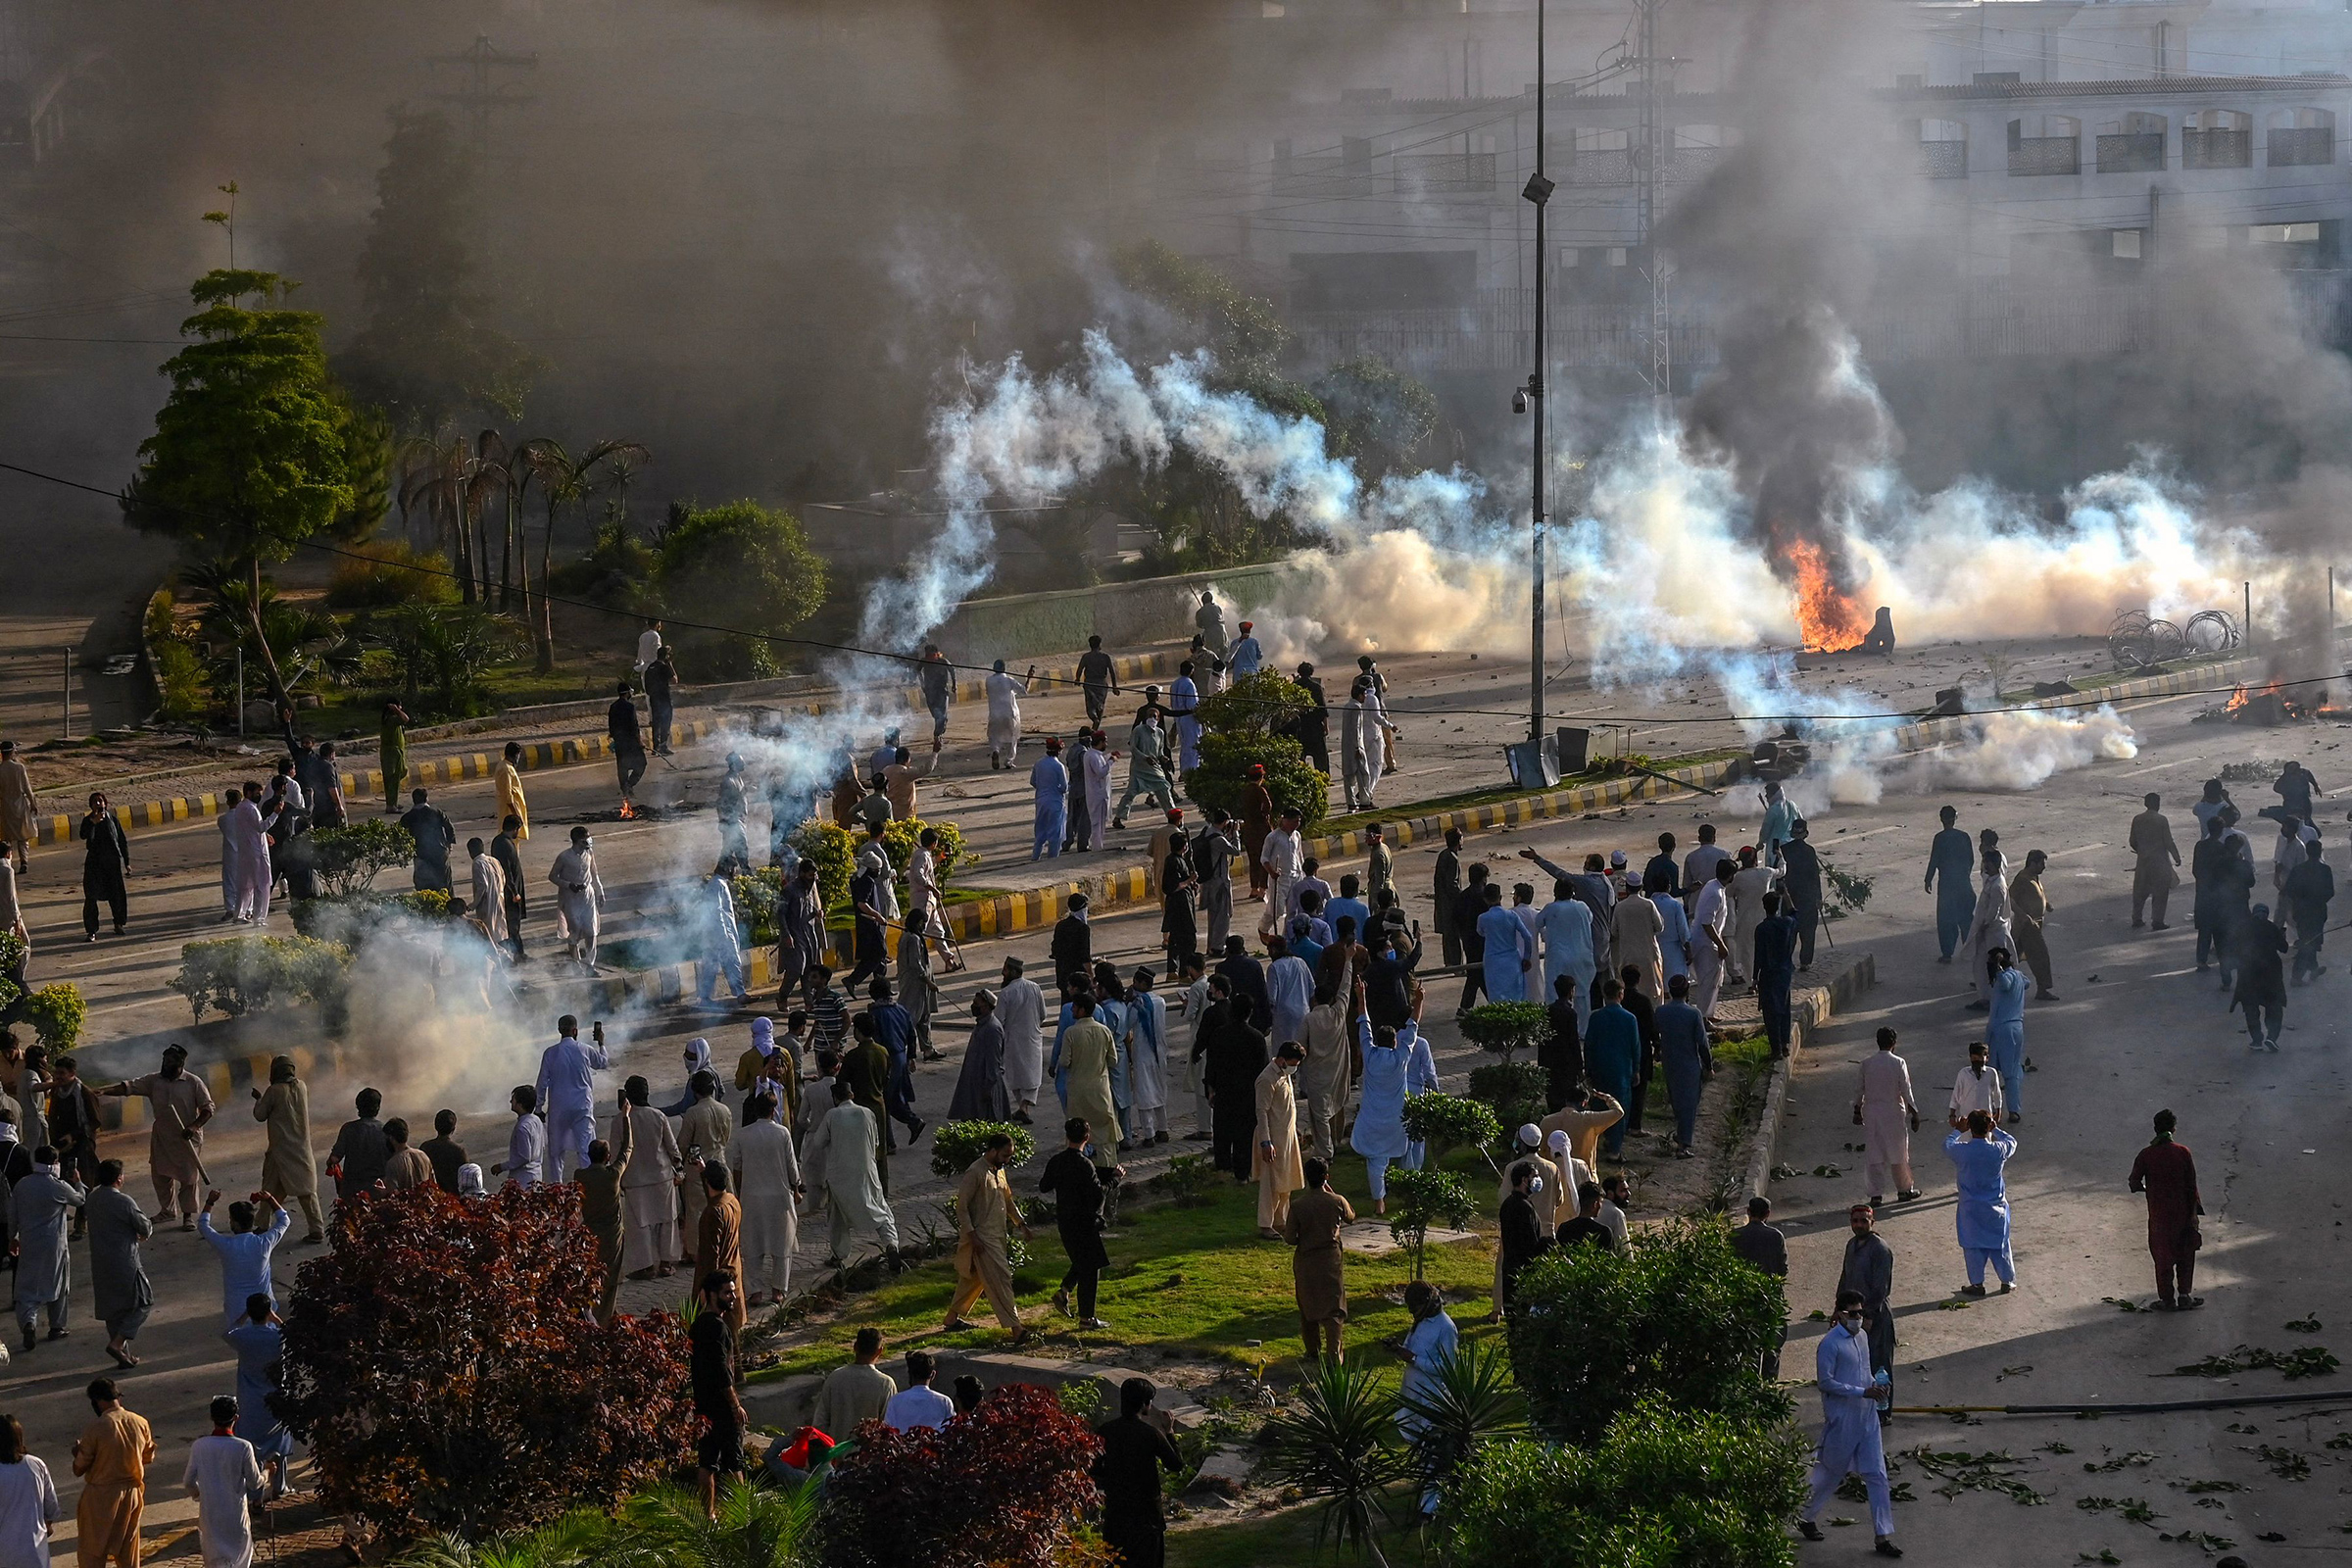 Police fire teargas shell towards PTI party activists and supporters of former Pakistan's Prime Minister Imran Khan during a protest against the arrest of their leader in Peshawar on May 9.